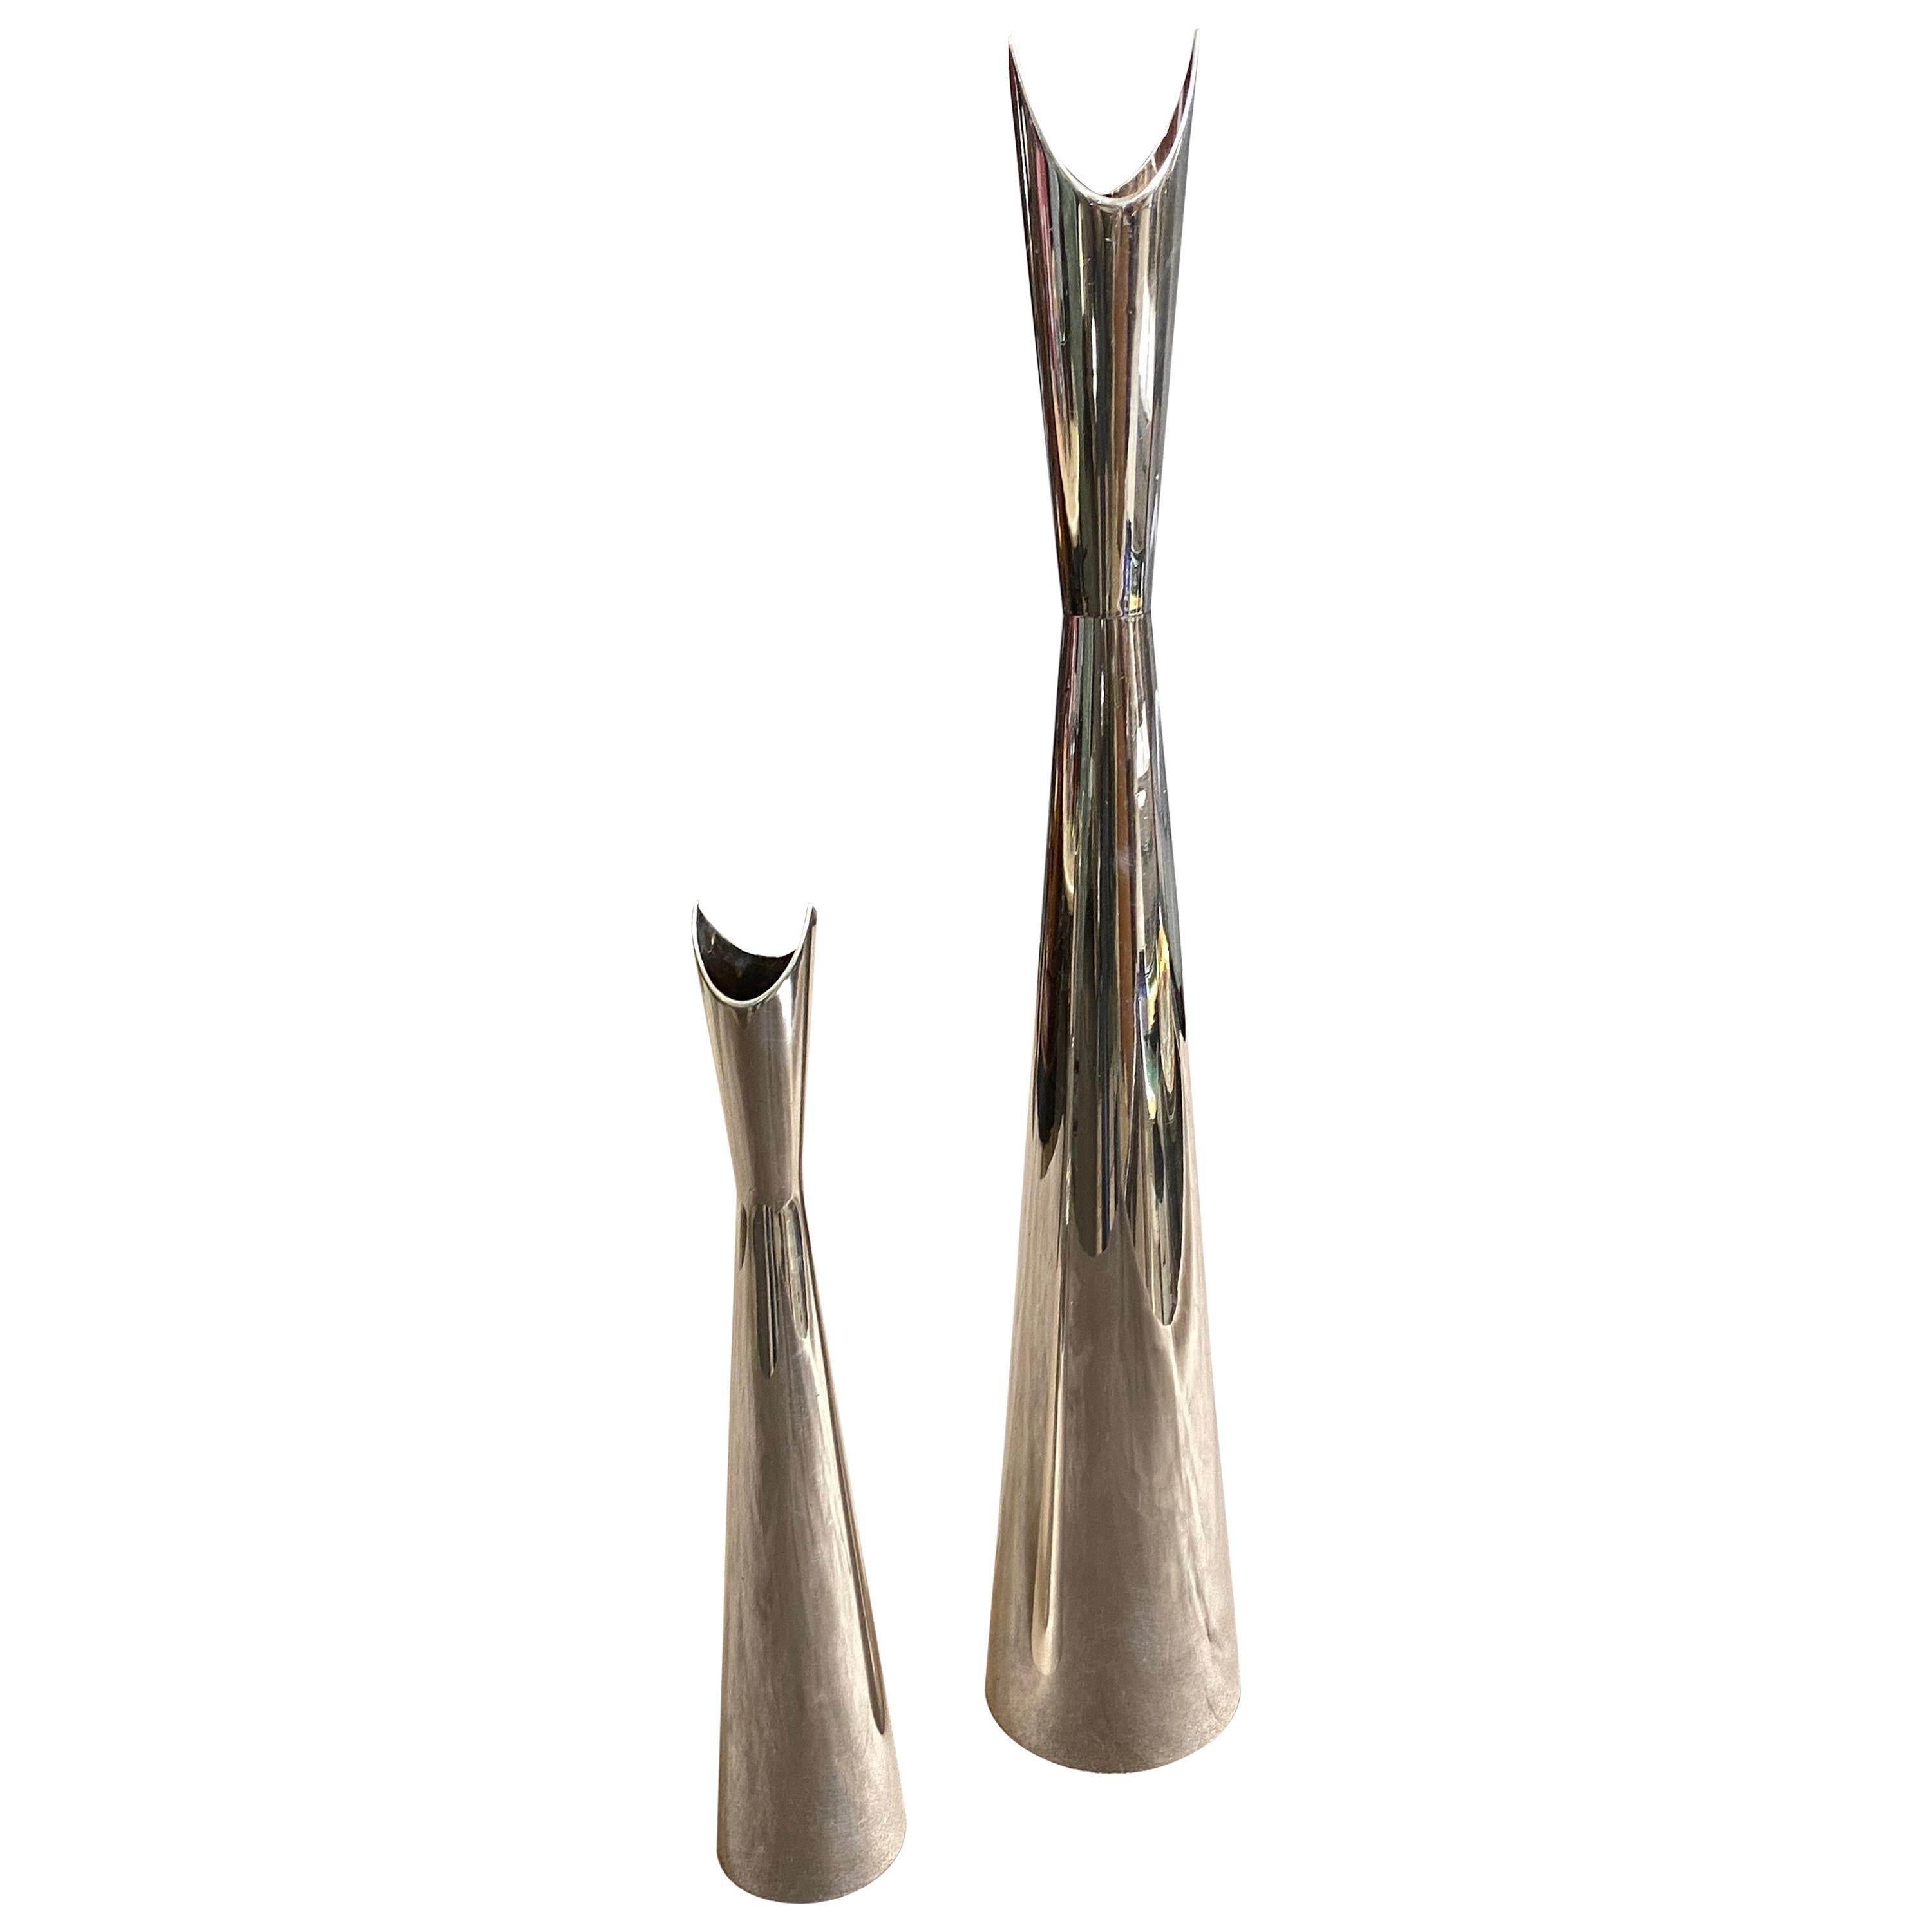 Set of Two Cardinale Vases Designed by Lino Sabattini for Christofle, 1960s